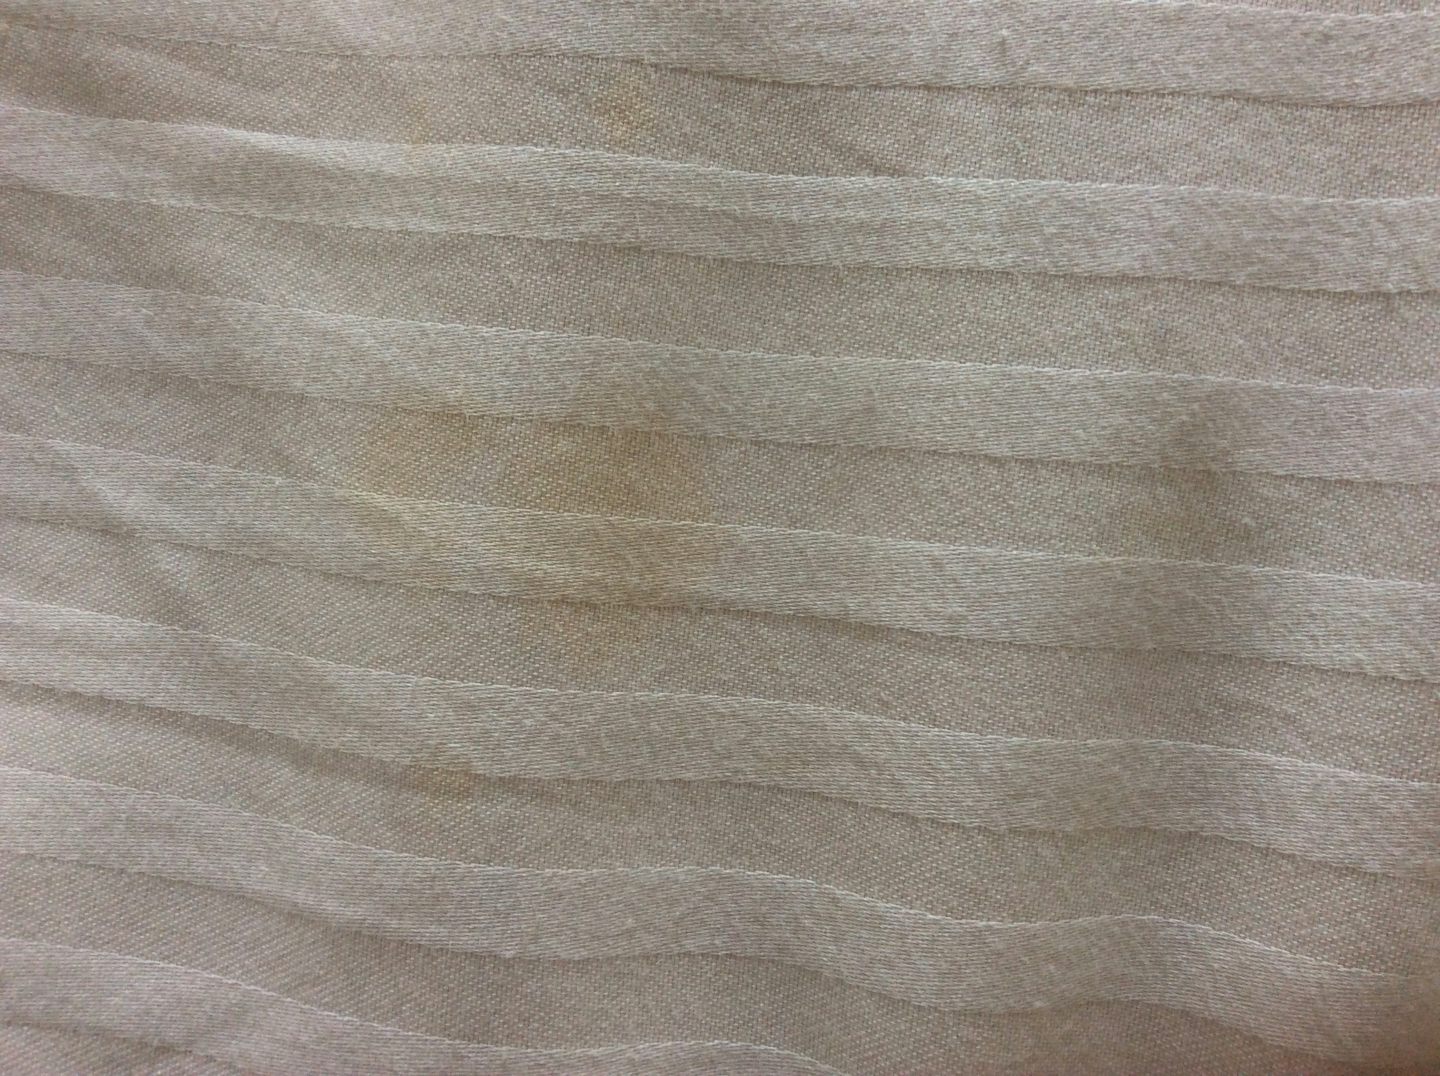 Stains on sheets